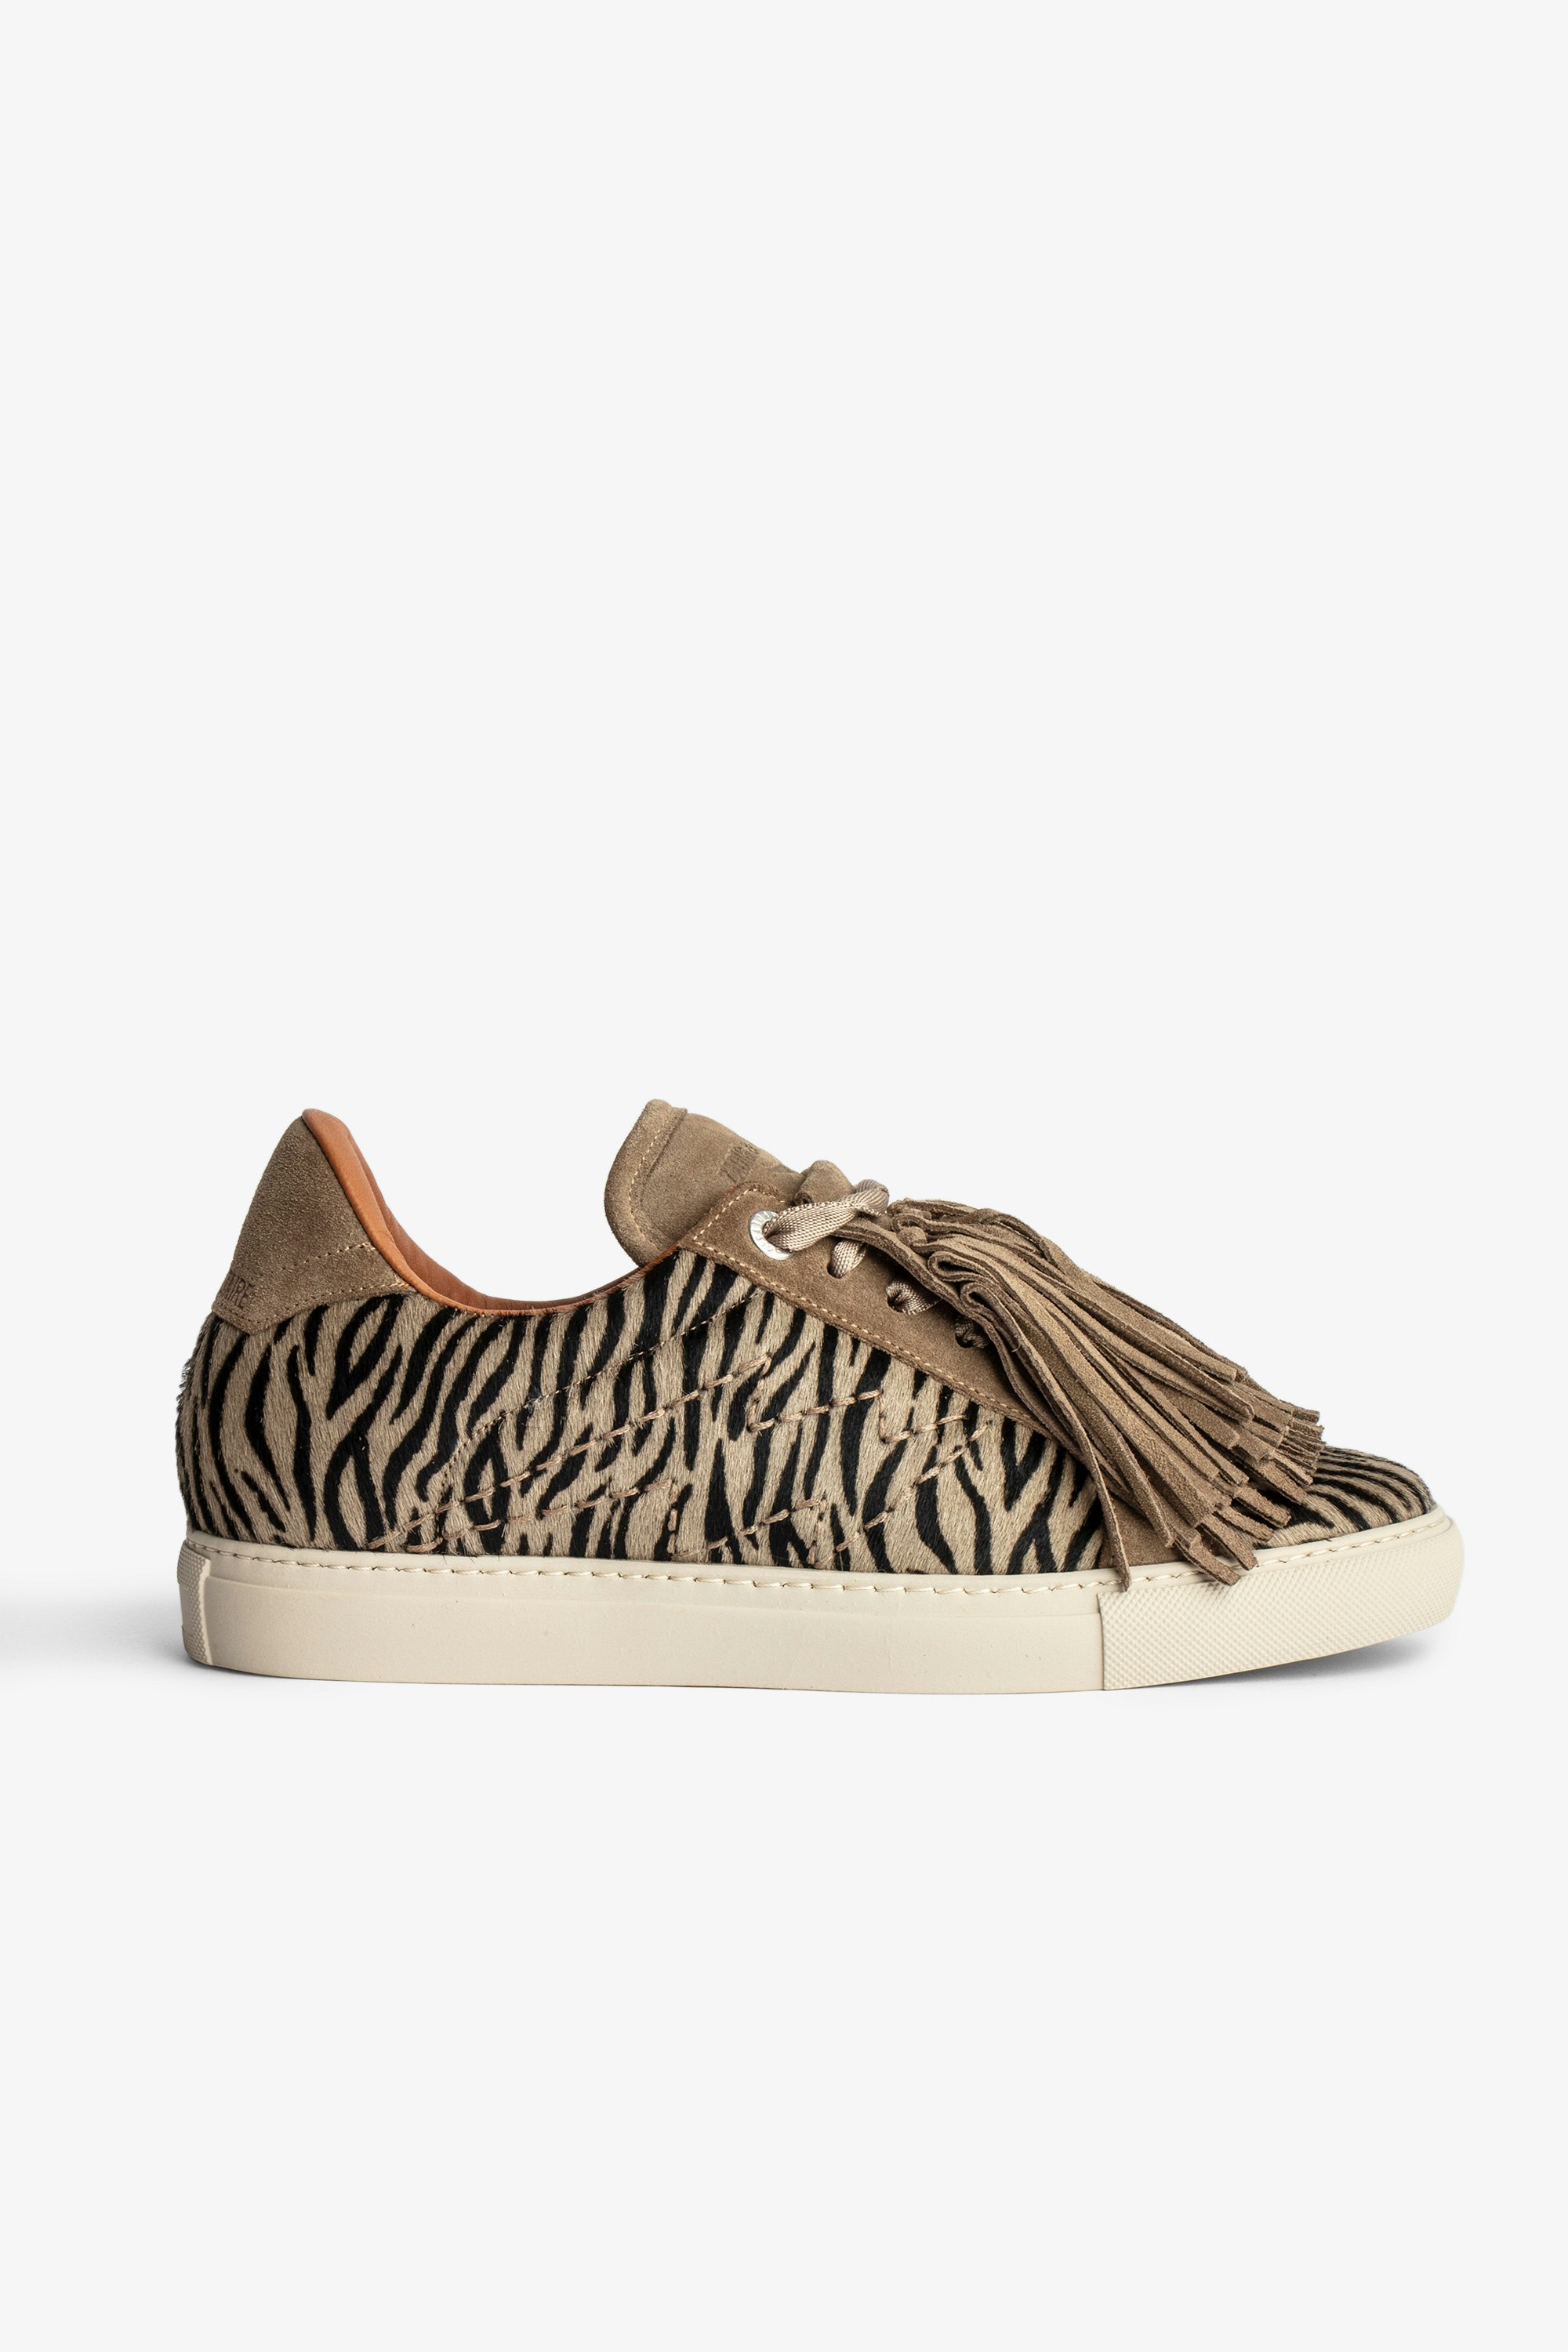 ZV1747 スニーカー Women’s taupe leather low-top sneakers with zebra print and fringing